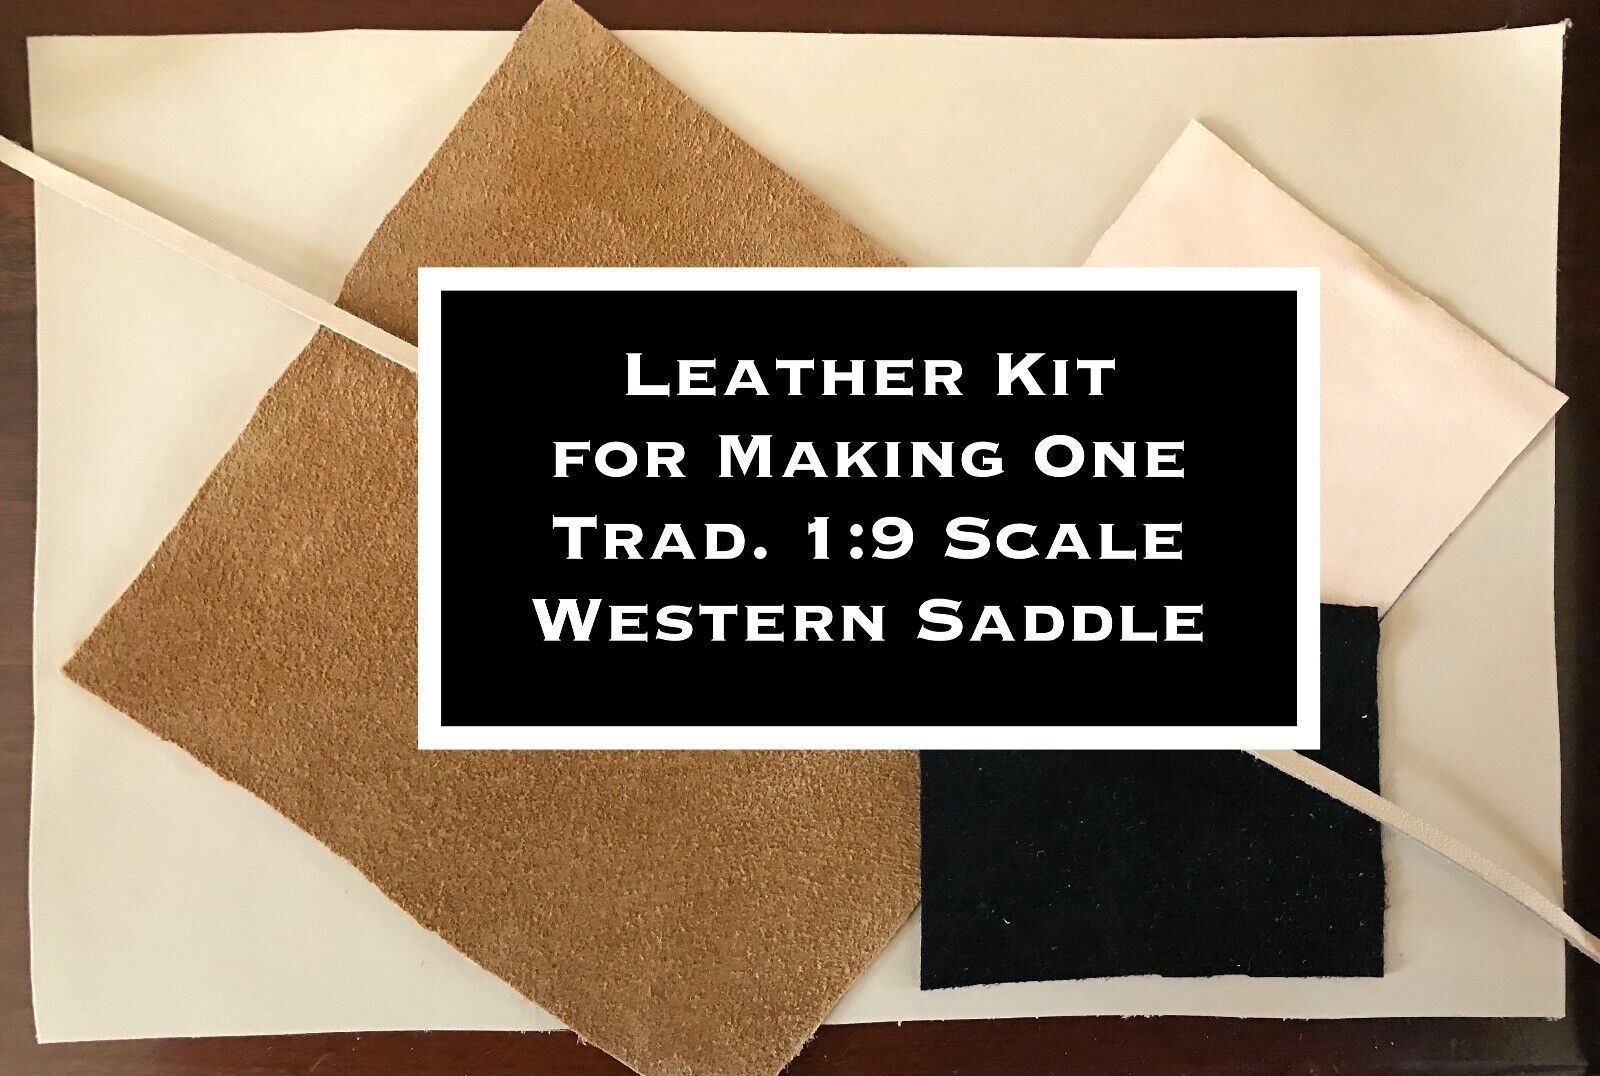 Traditional 1:9 Scale Western Saddle LEATHER KIT - Tooling/Skiver/2 Suedes/Lace